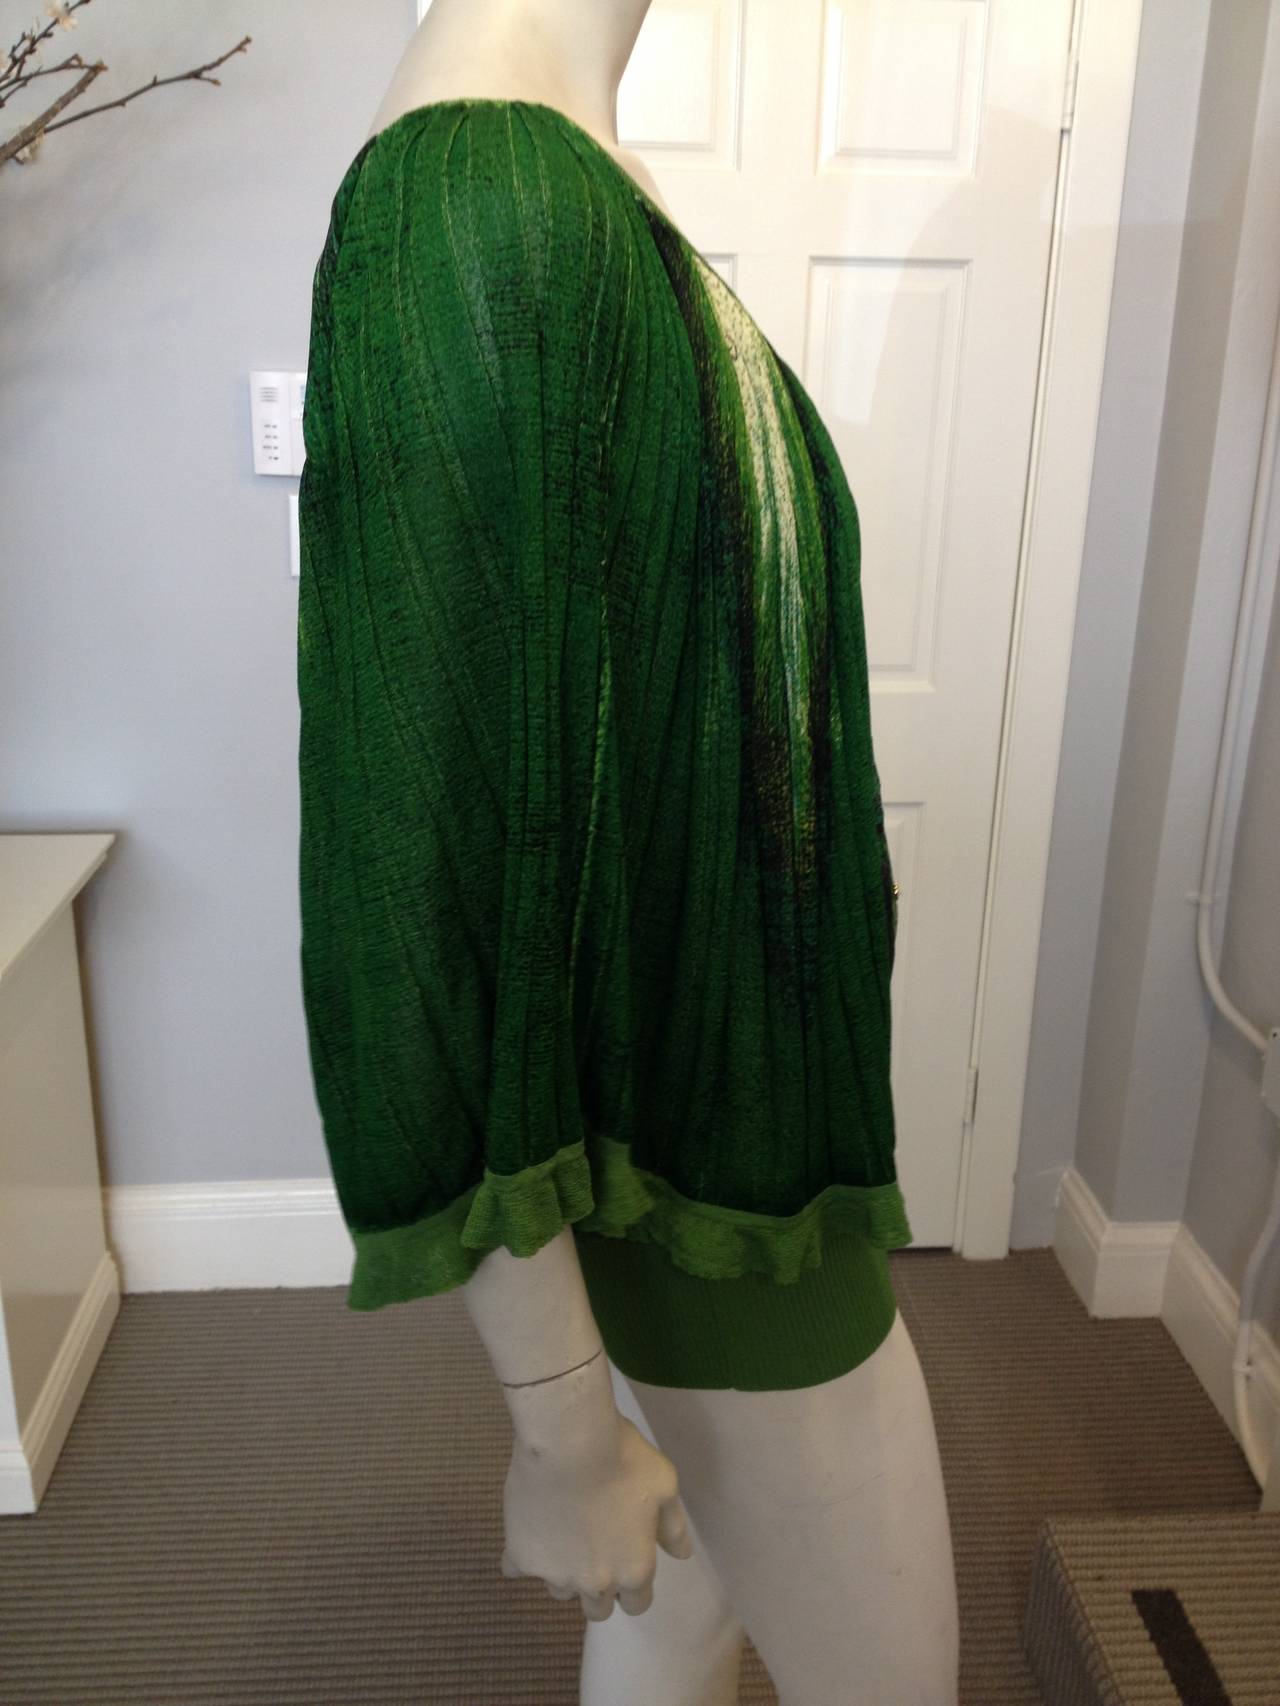 Beautifully variegated greens ranging from celery to emerald and interspersed with cream and black create a most attractive effect on this dramatic summer Cavalli top. The cut is striking - the neckline scoops in the front and back, and the sleeves